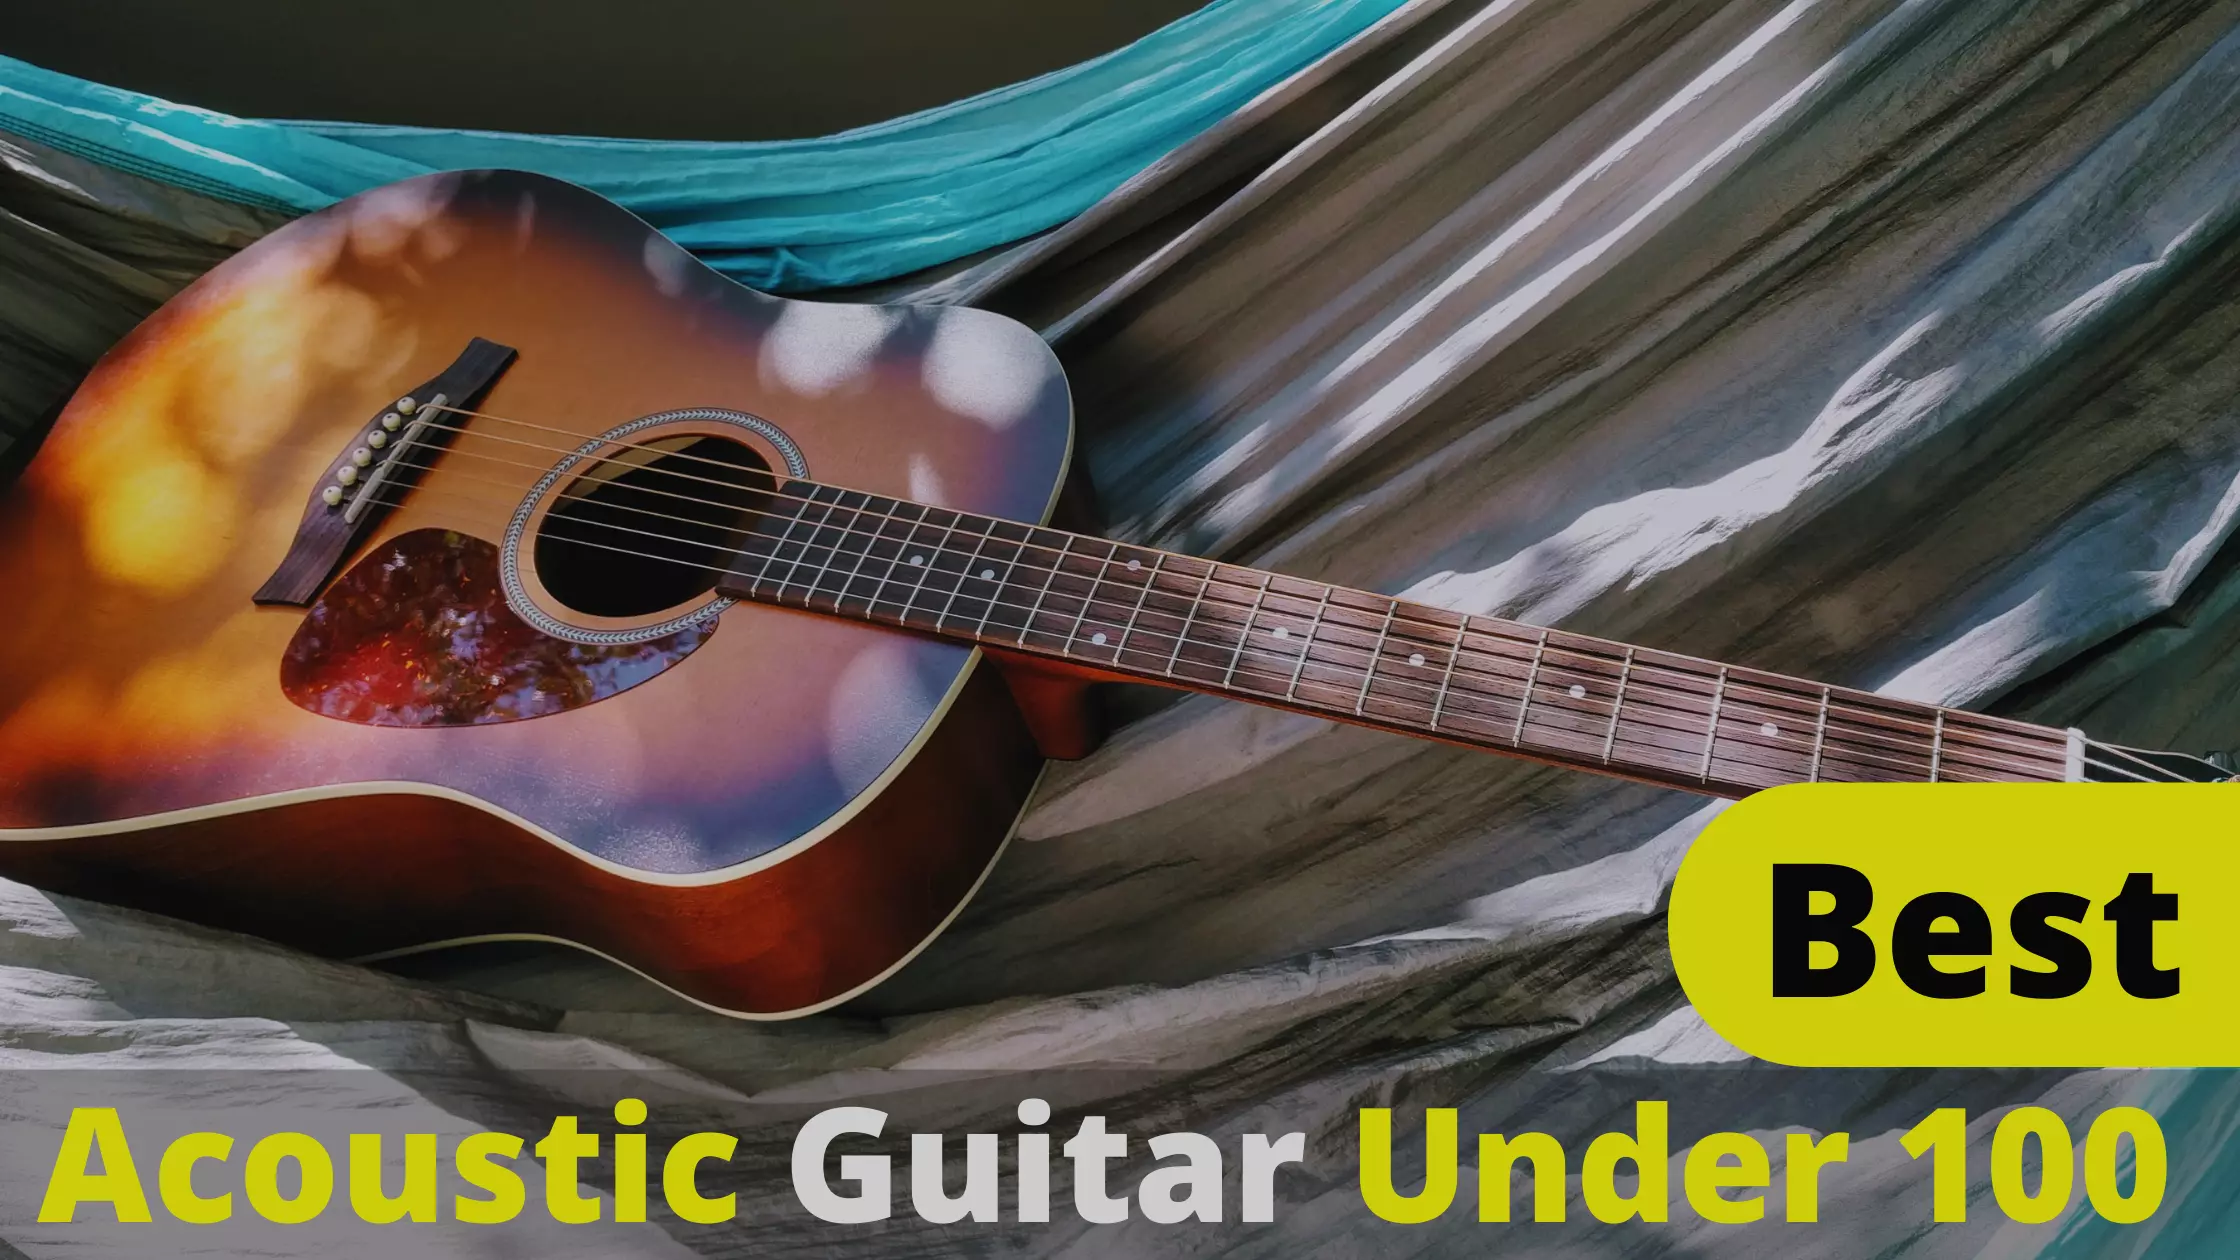 Top 10 Best Acoustic Guitar Under 100 Reviews and Buying Guide 2022